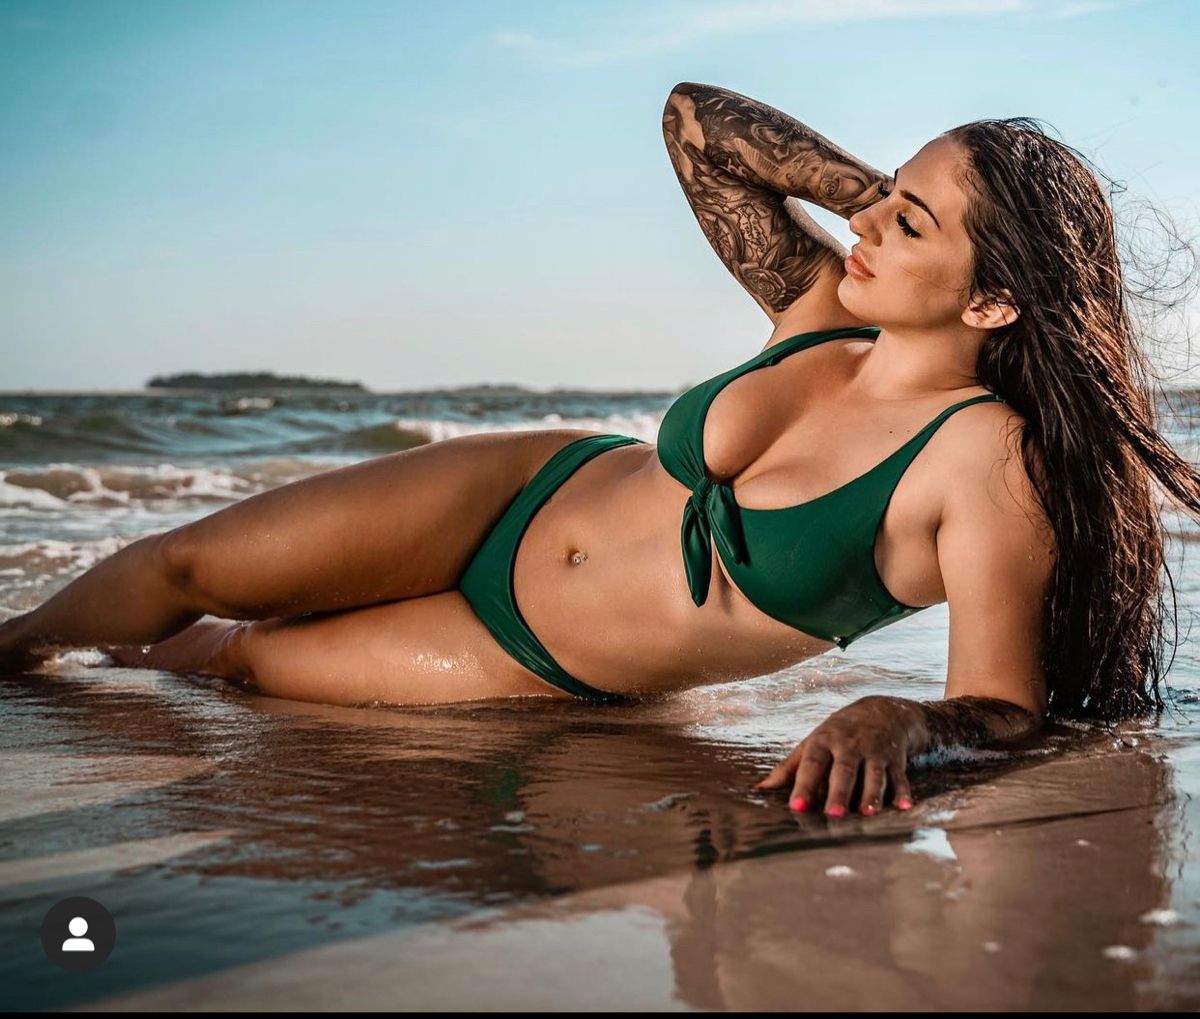 11 Flattering Bikini Poses for Confident Beach Photoshoots in 2023: Capture  a Natural Vacation Vibe! | by MAX LIBERTINE | Medium